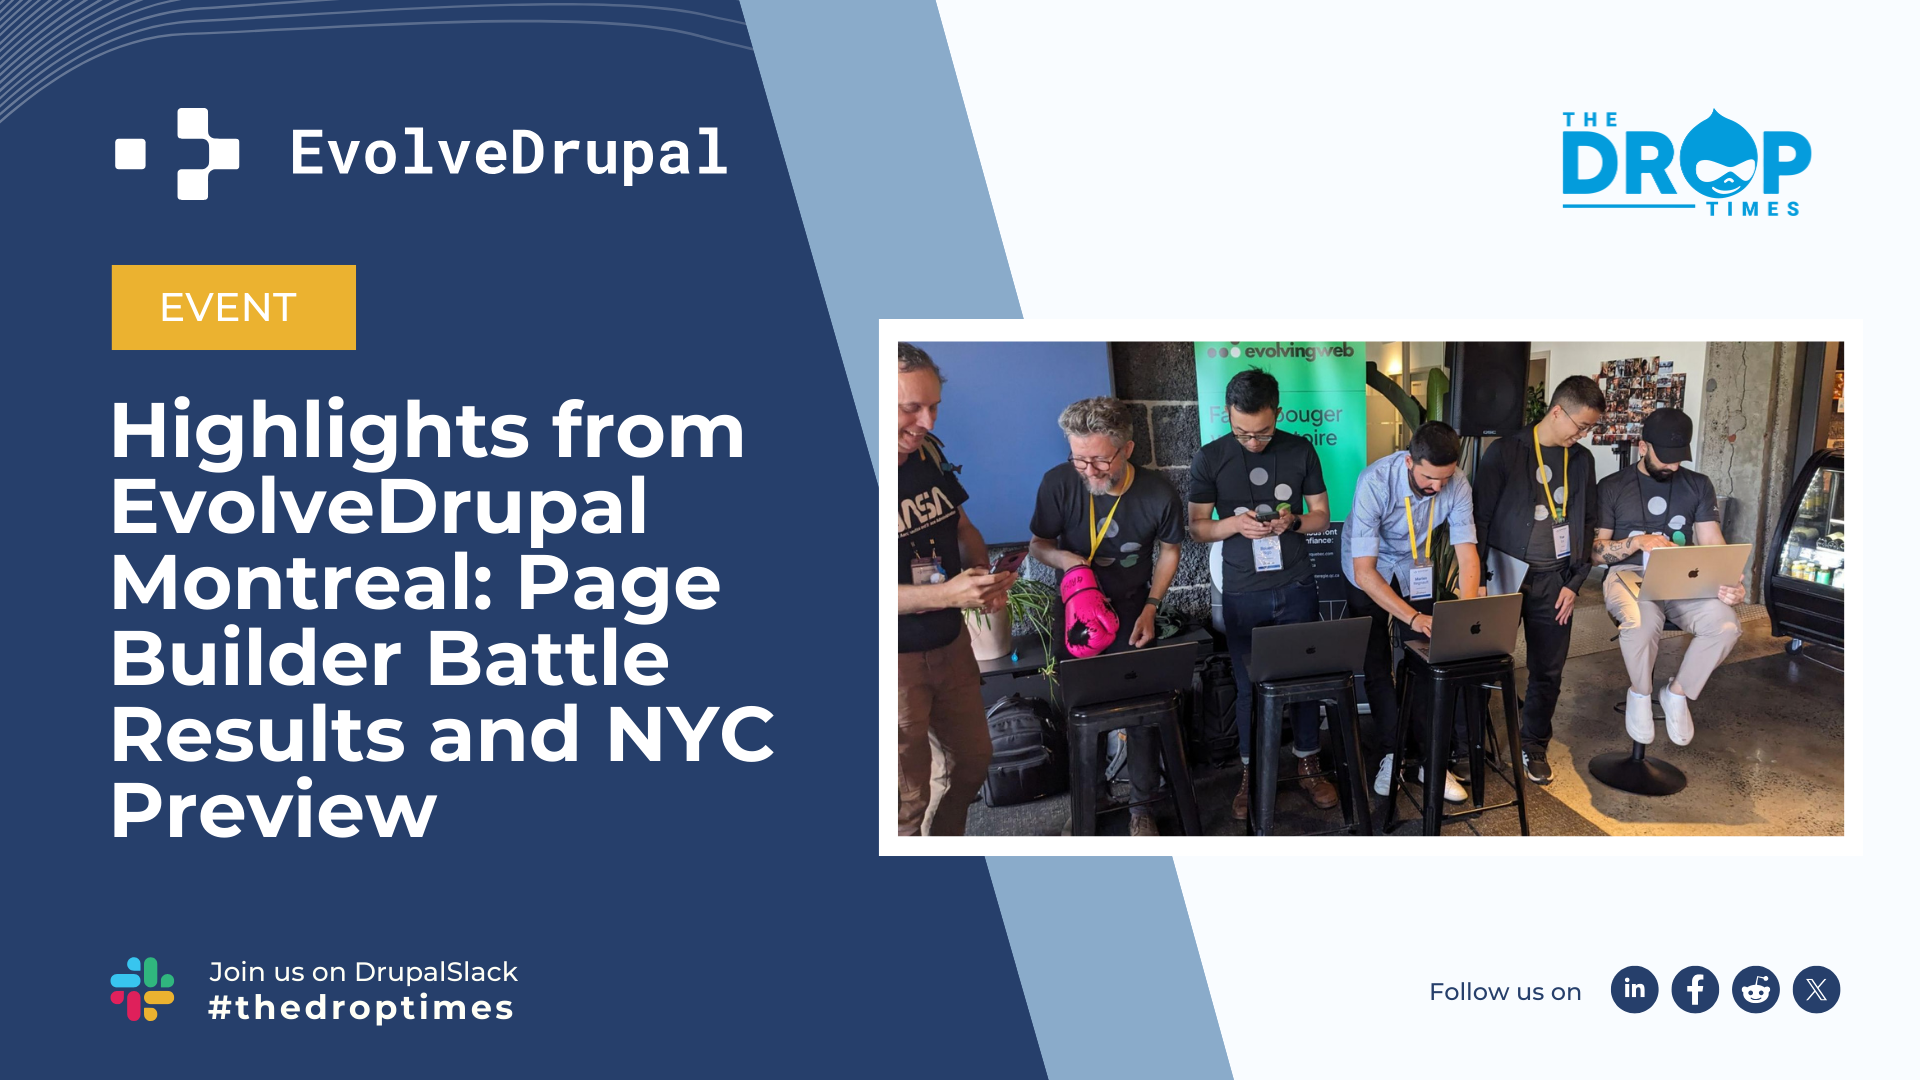 Highlights from EvolveDrupal Montreal: Page Builder Battle Results and NYC Preview